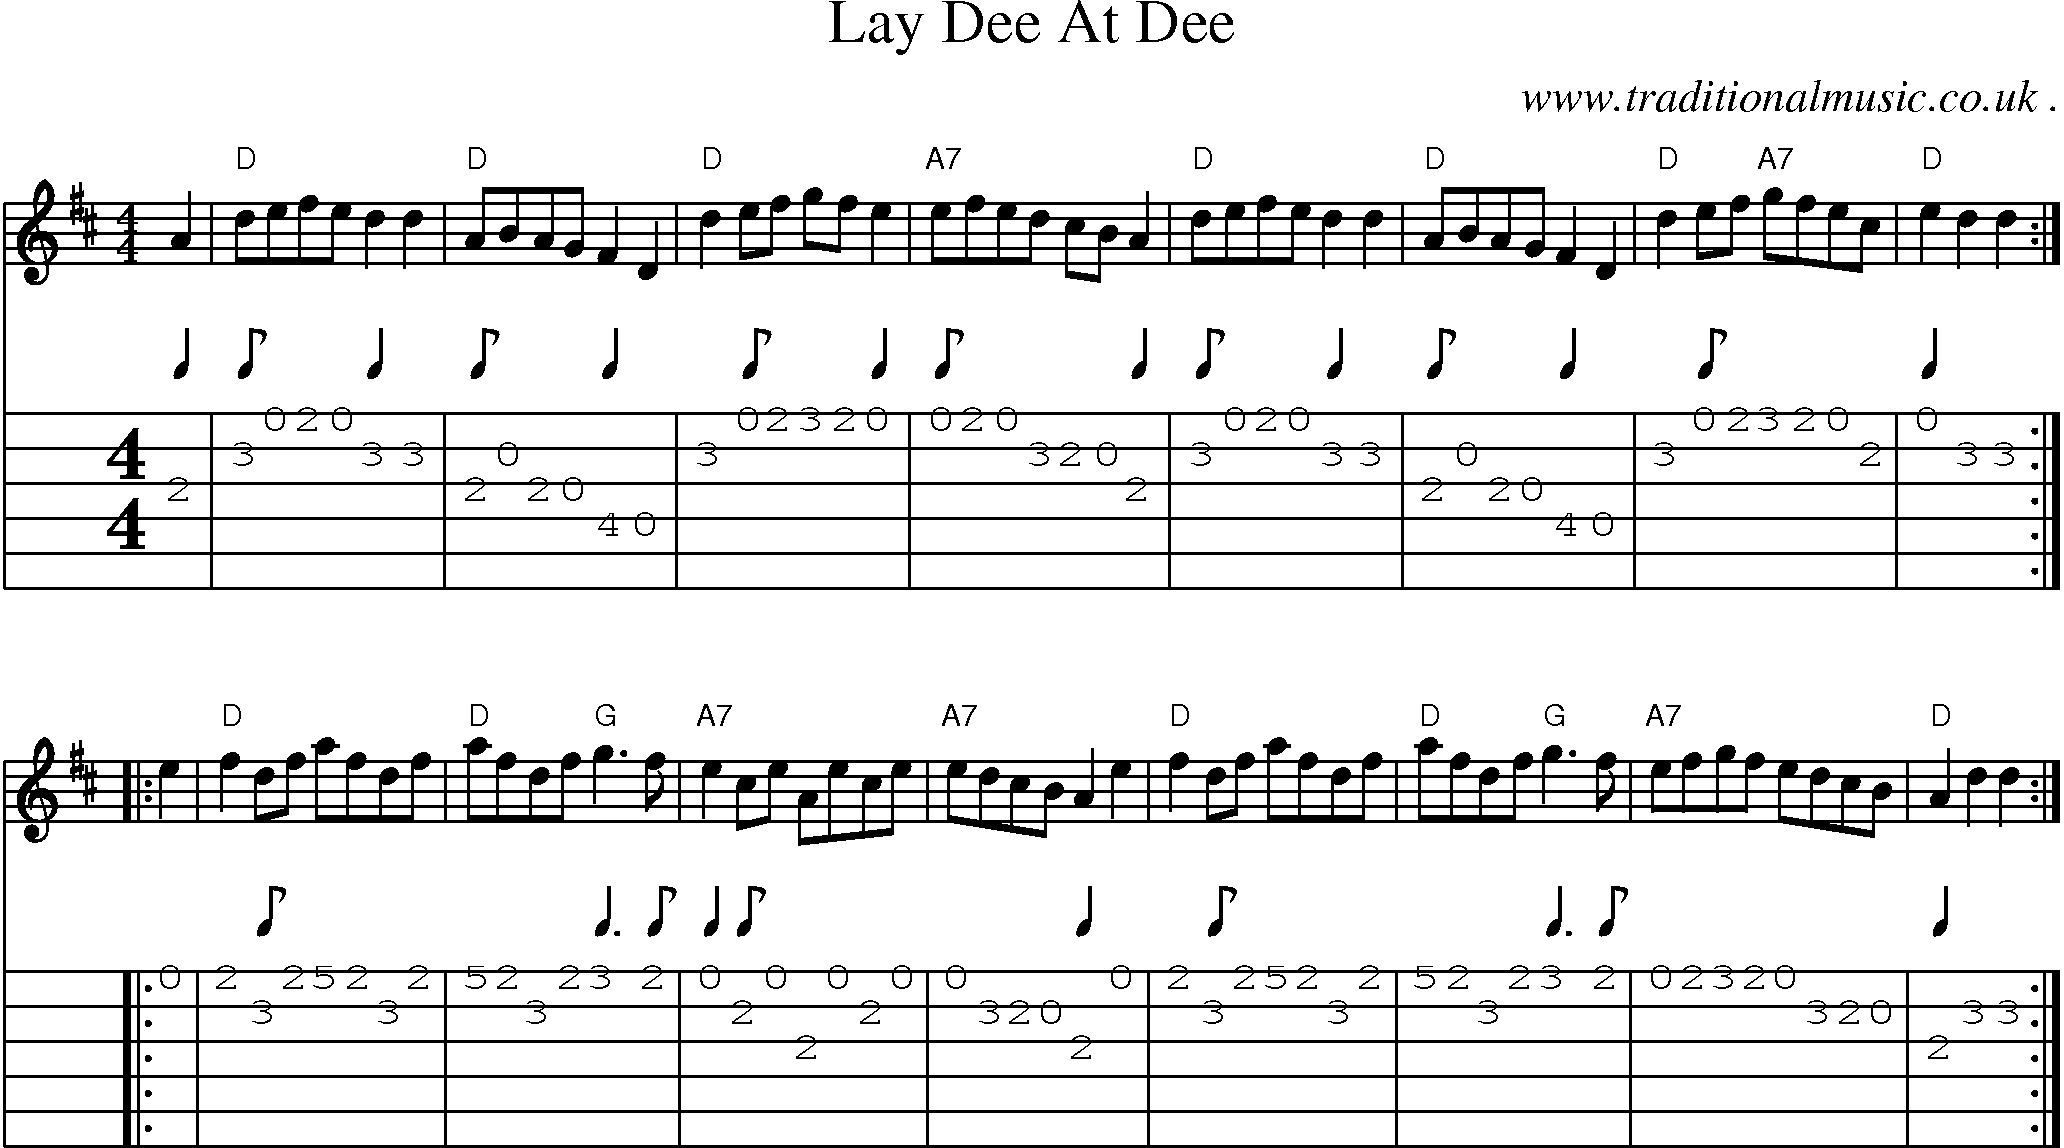 Sheet-music  score, Chords and Guitar Tabs for Lay Dee At Dee